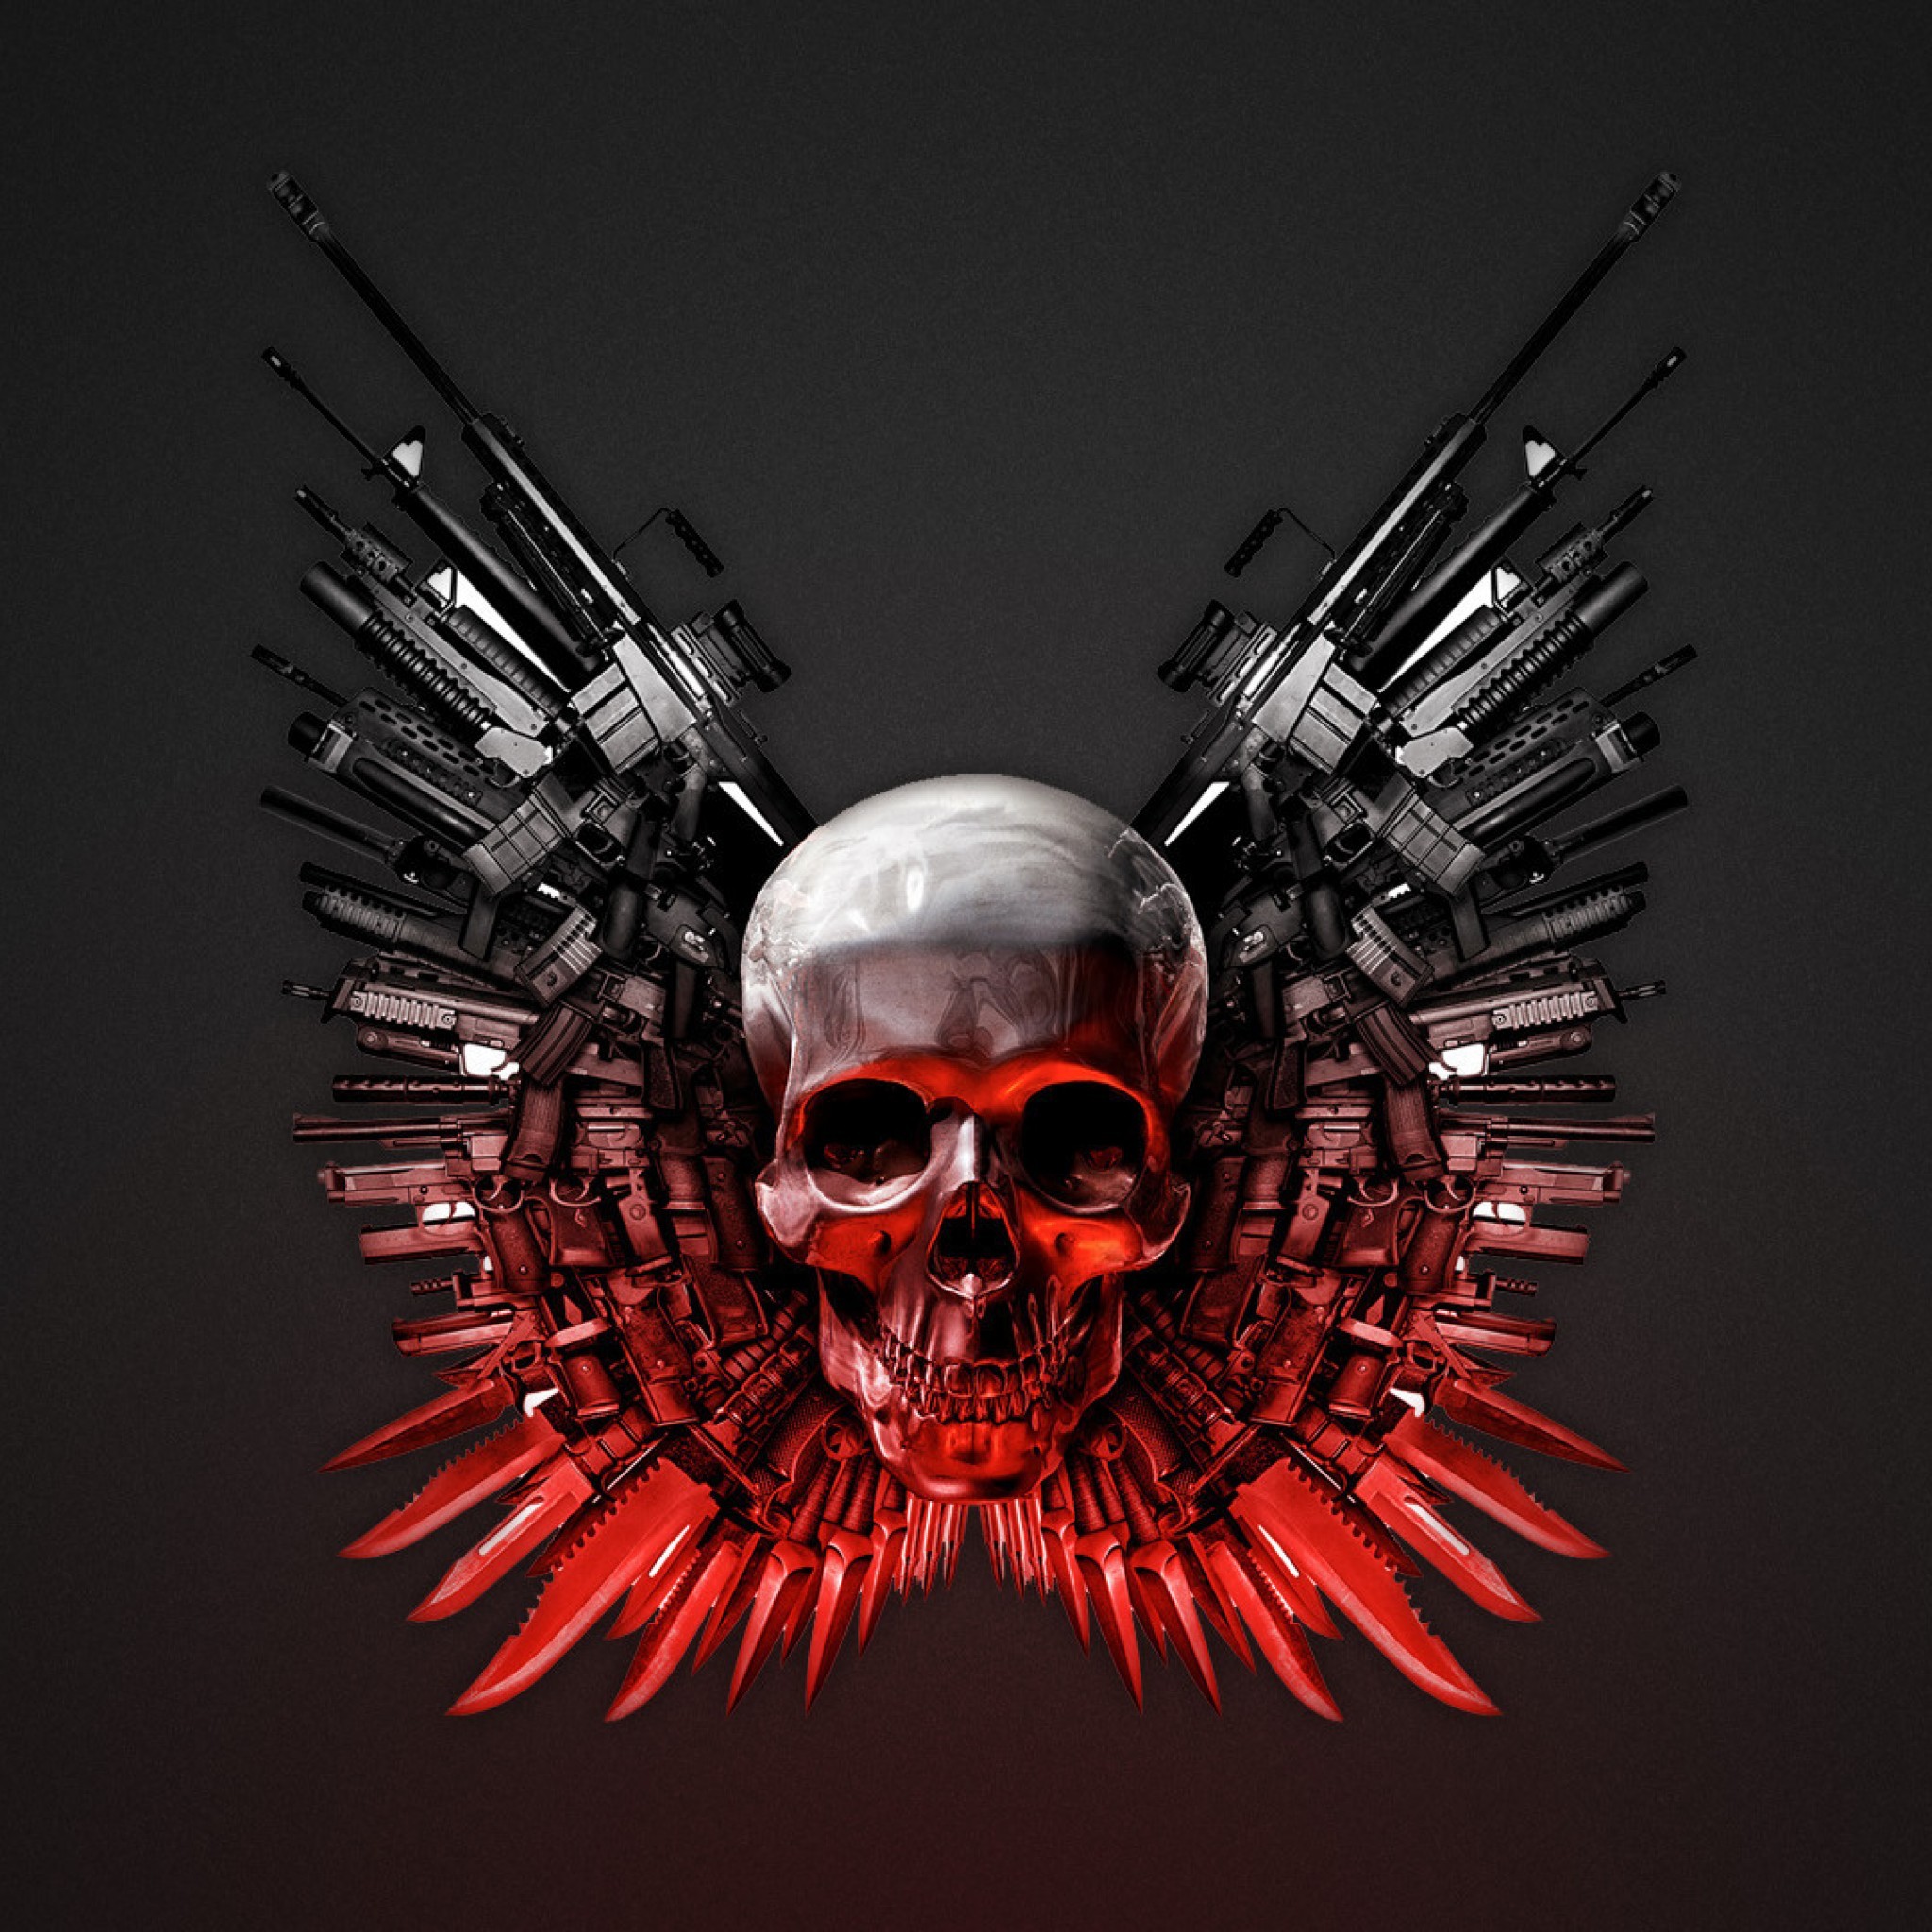 2048x2048 1997 2: The Expendables Weapons Hd iPad Air wallpaper